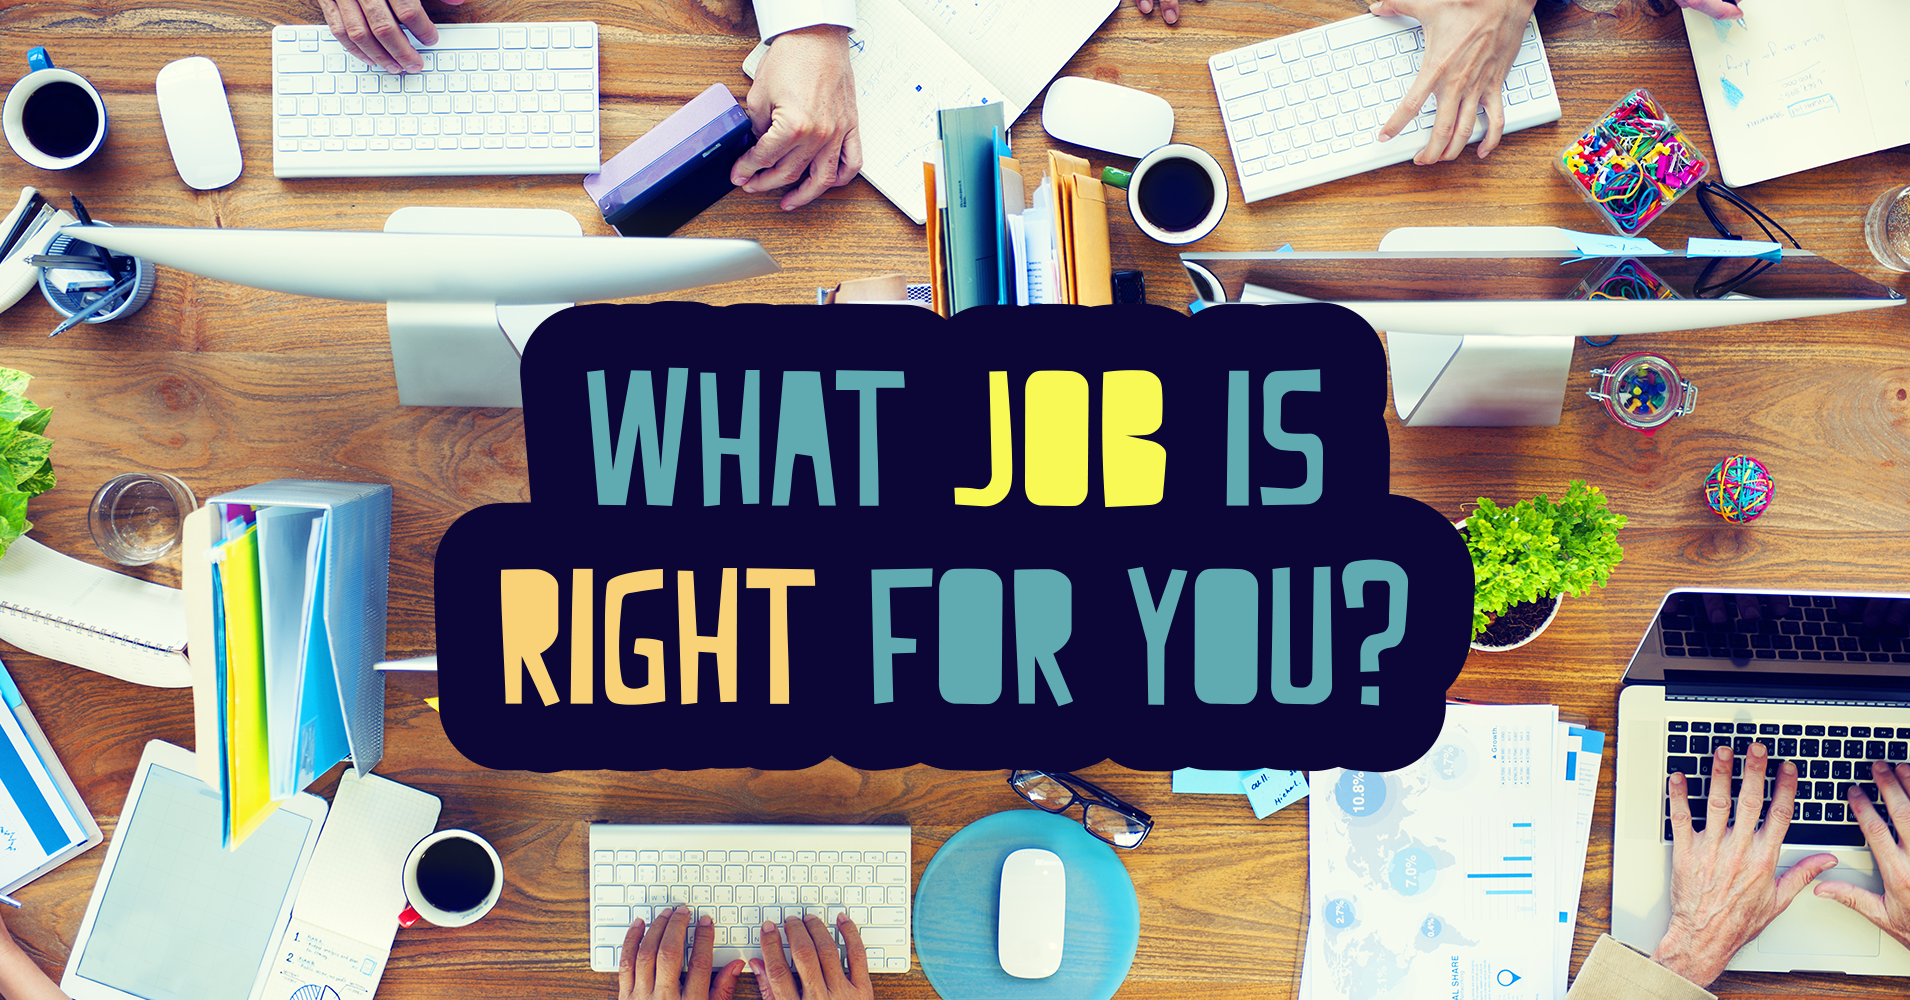 find the right job for me quiz design